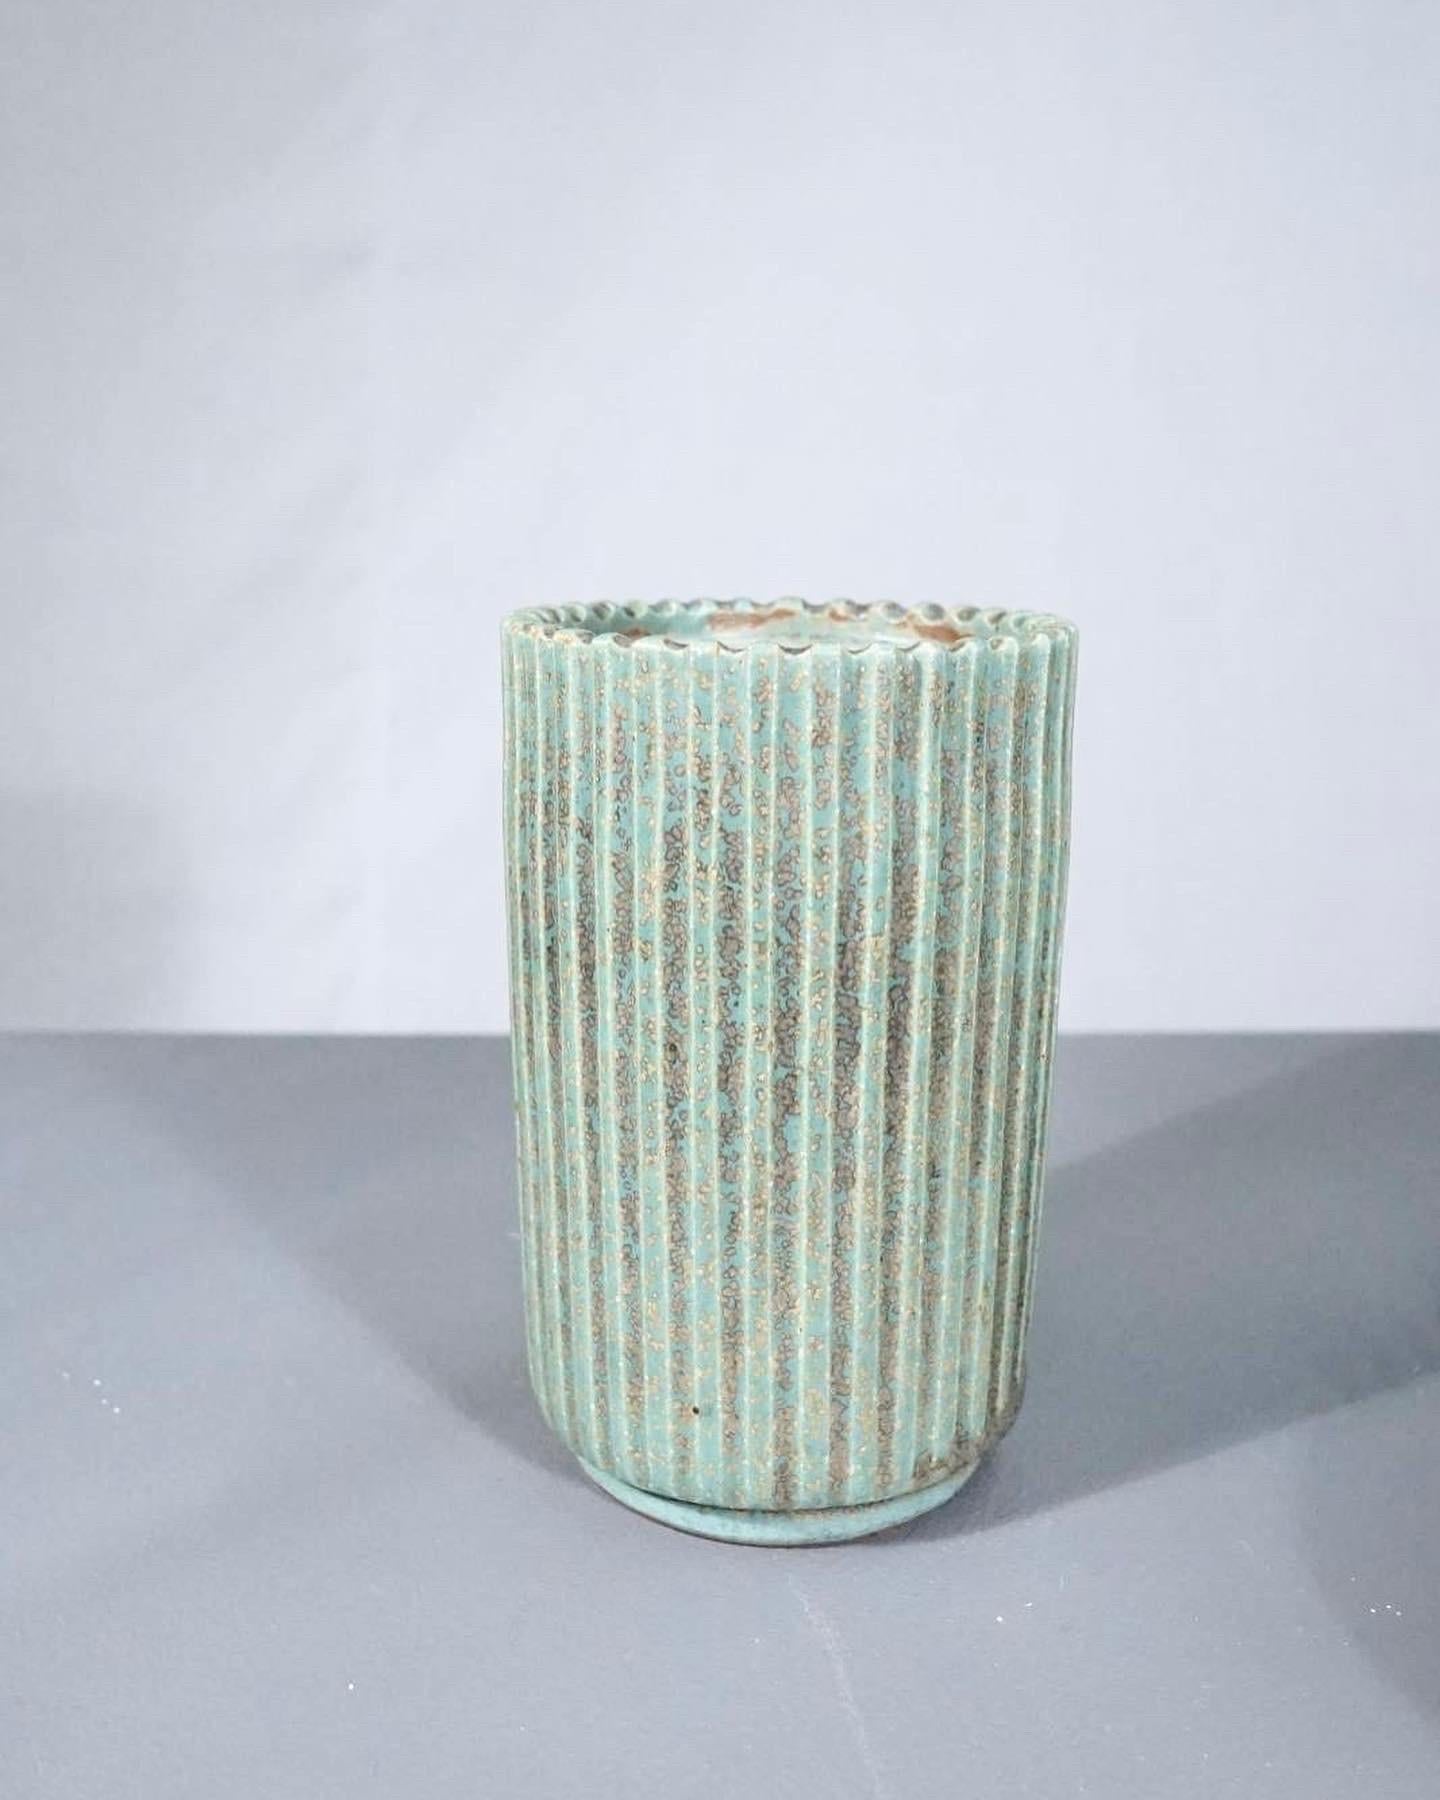 Set of three Arne Bang vases in Art Deco style.
The vases are all in good and original condition with fantastic glaze types.
These vases are rifled in classic Arne Bang style, you can see Arne Bang’s big inspiration from the Art Deco movement in